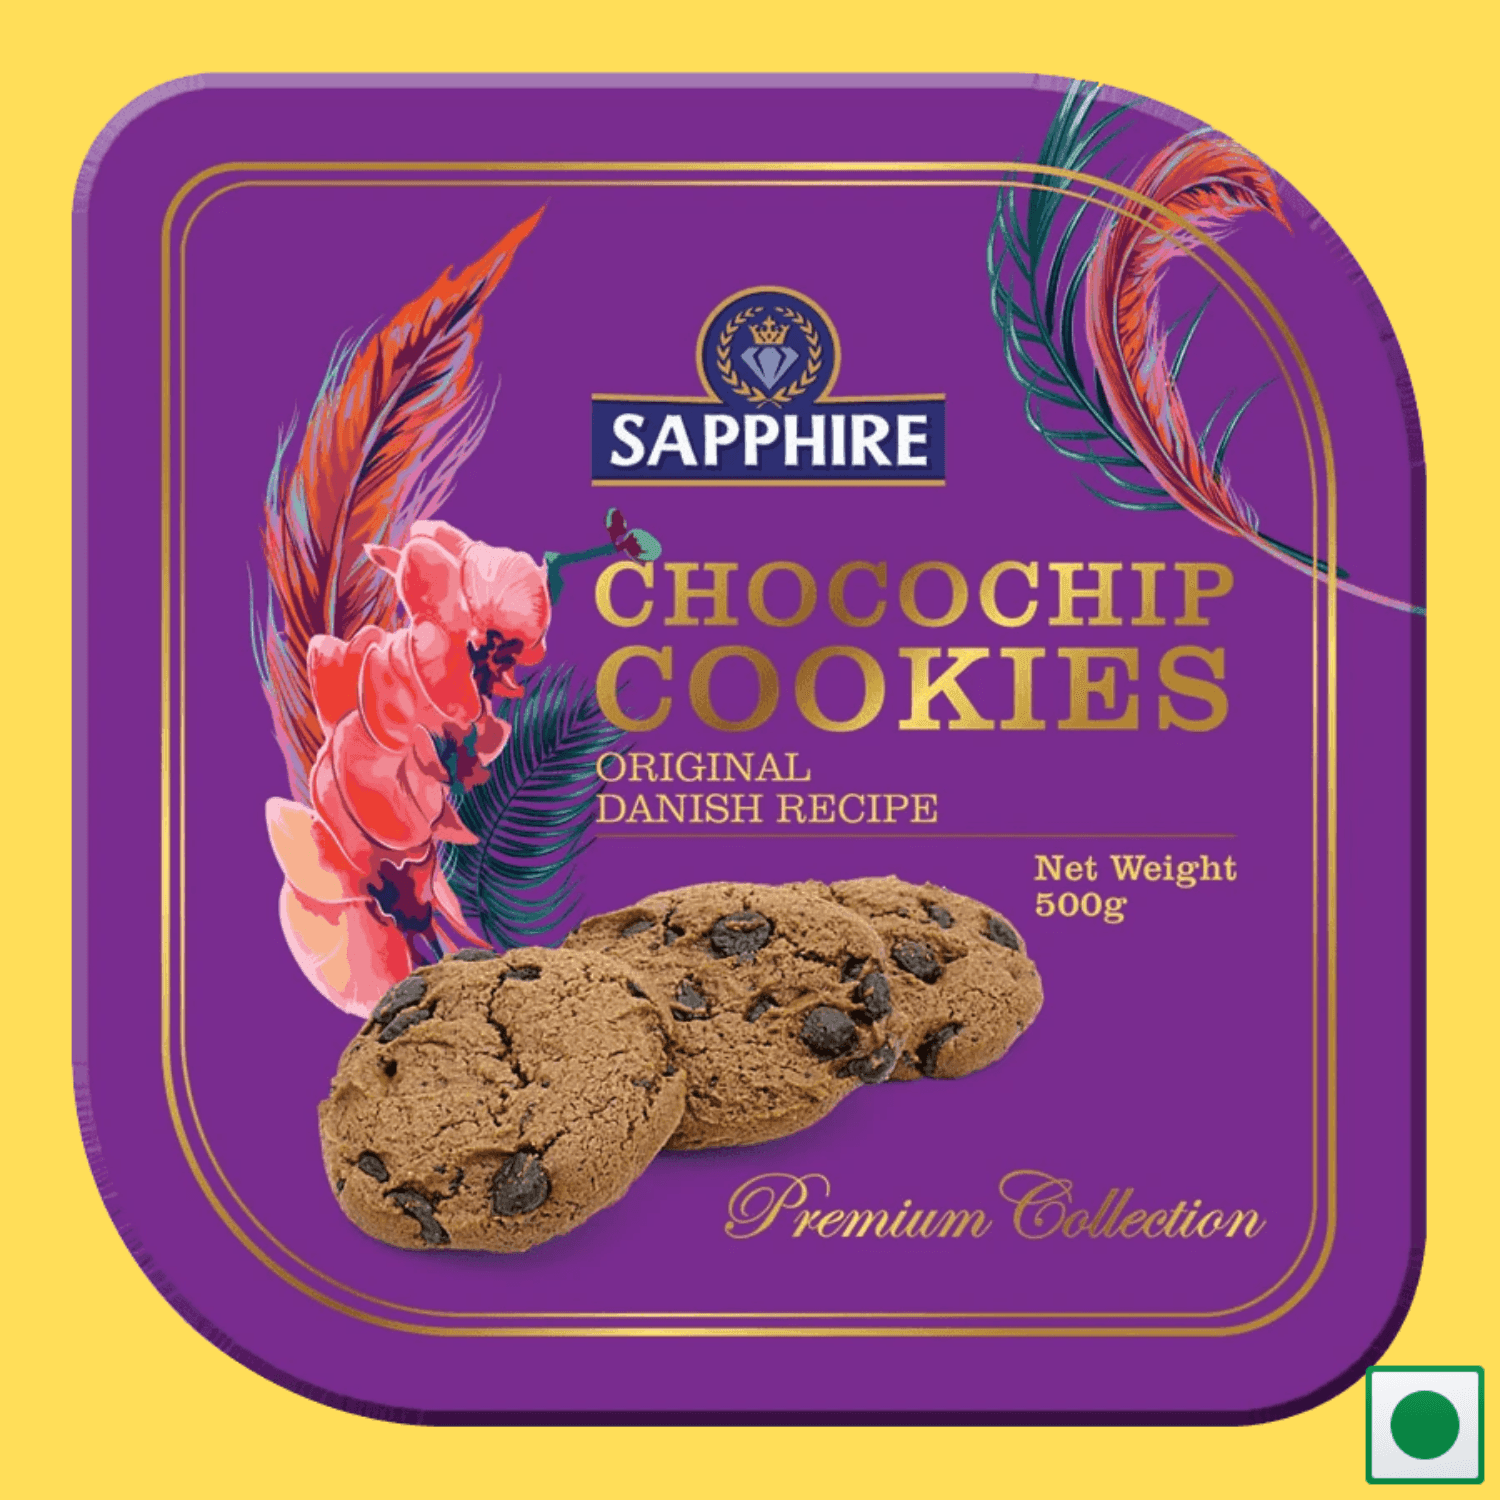 Sapphire Chocochip Cookies Premium Collection, 500g (Imported) - Super 7 Mart